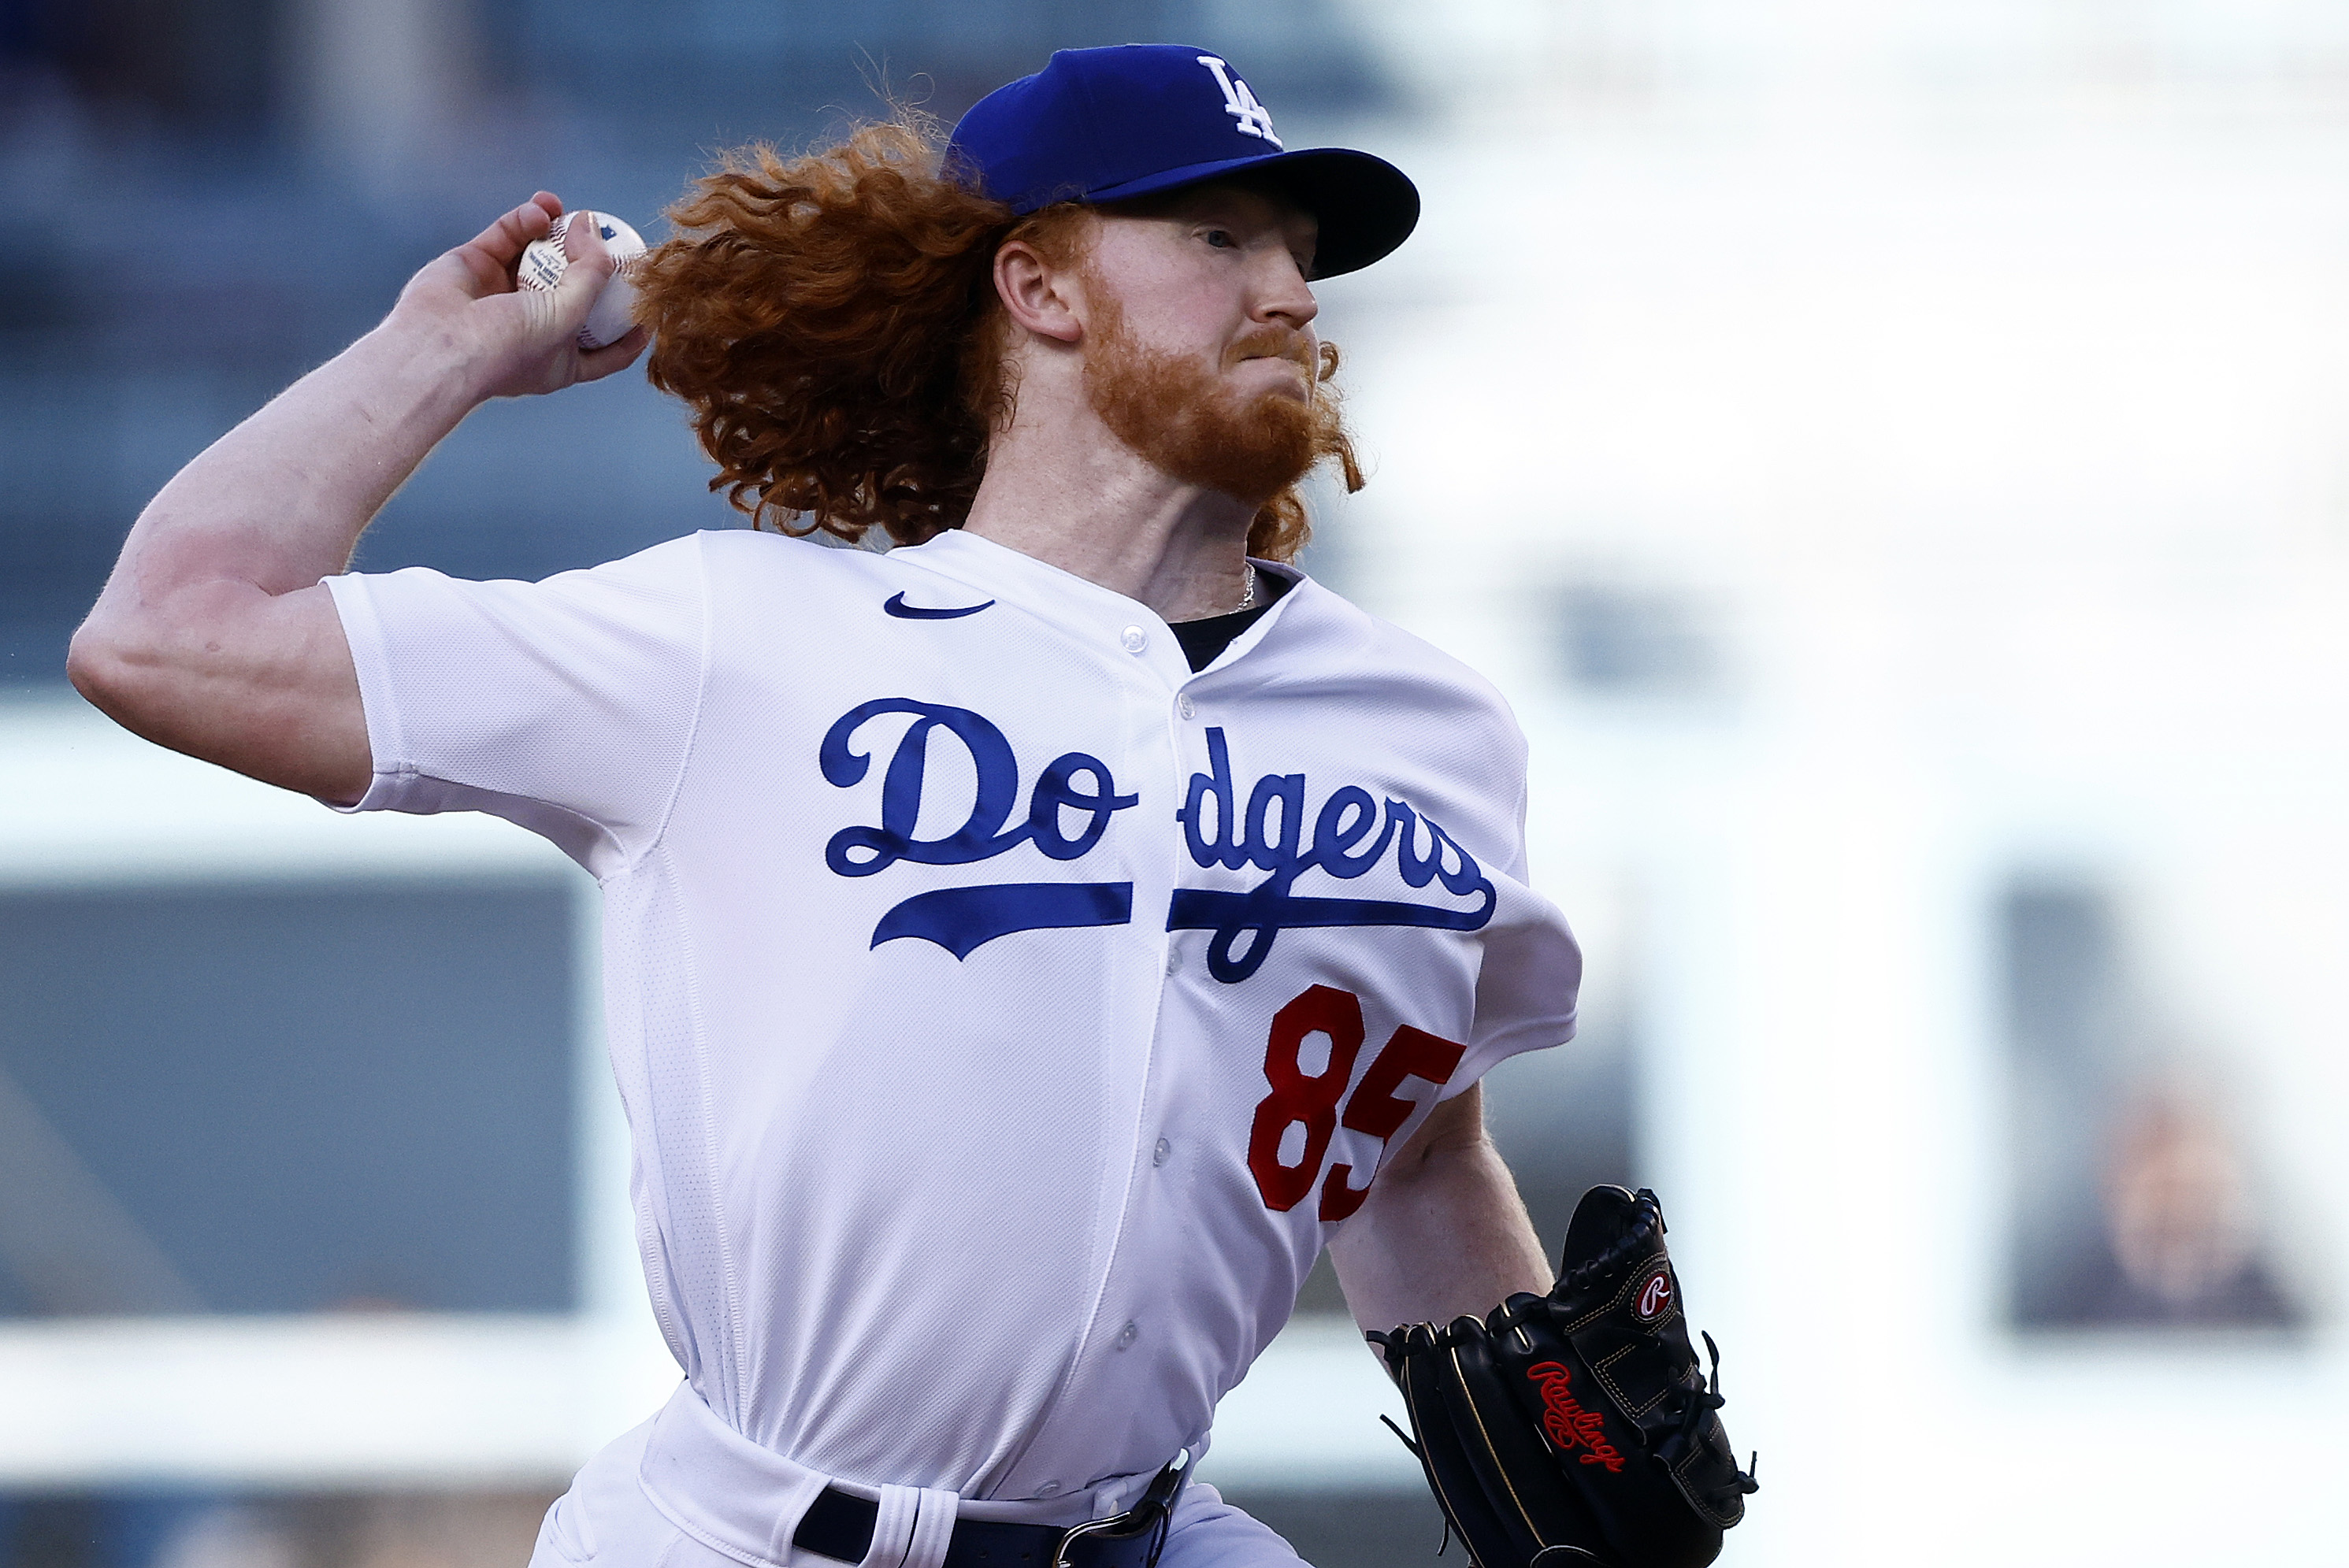 07-28-2022 Dustin May and the MiLB Summary - Dodger